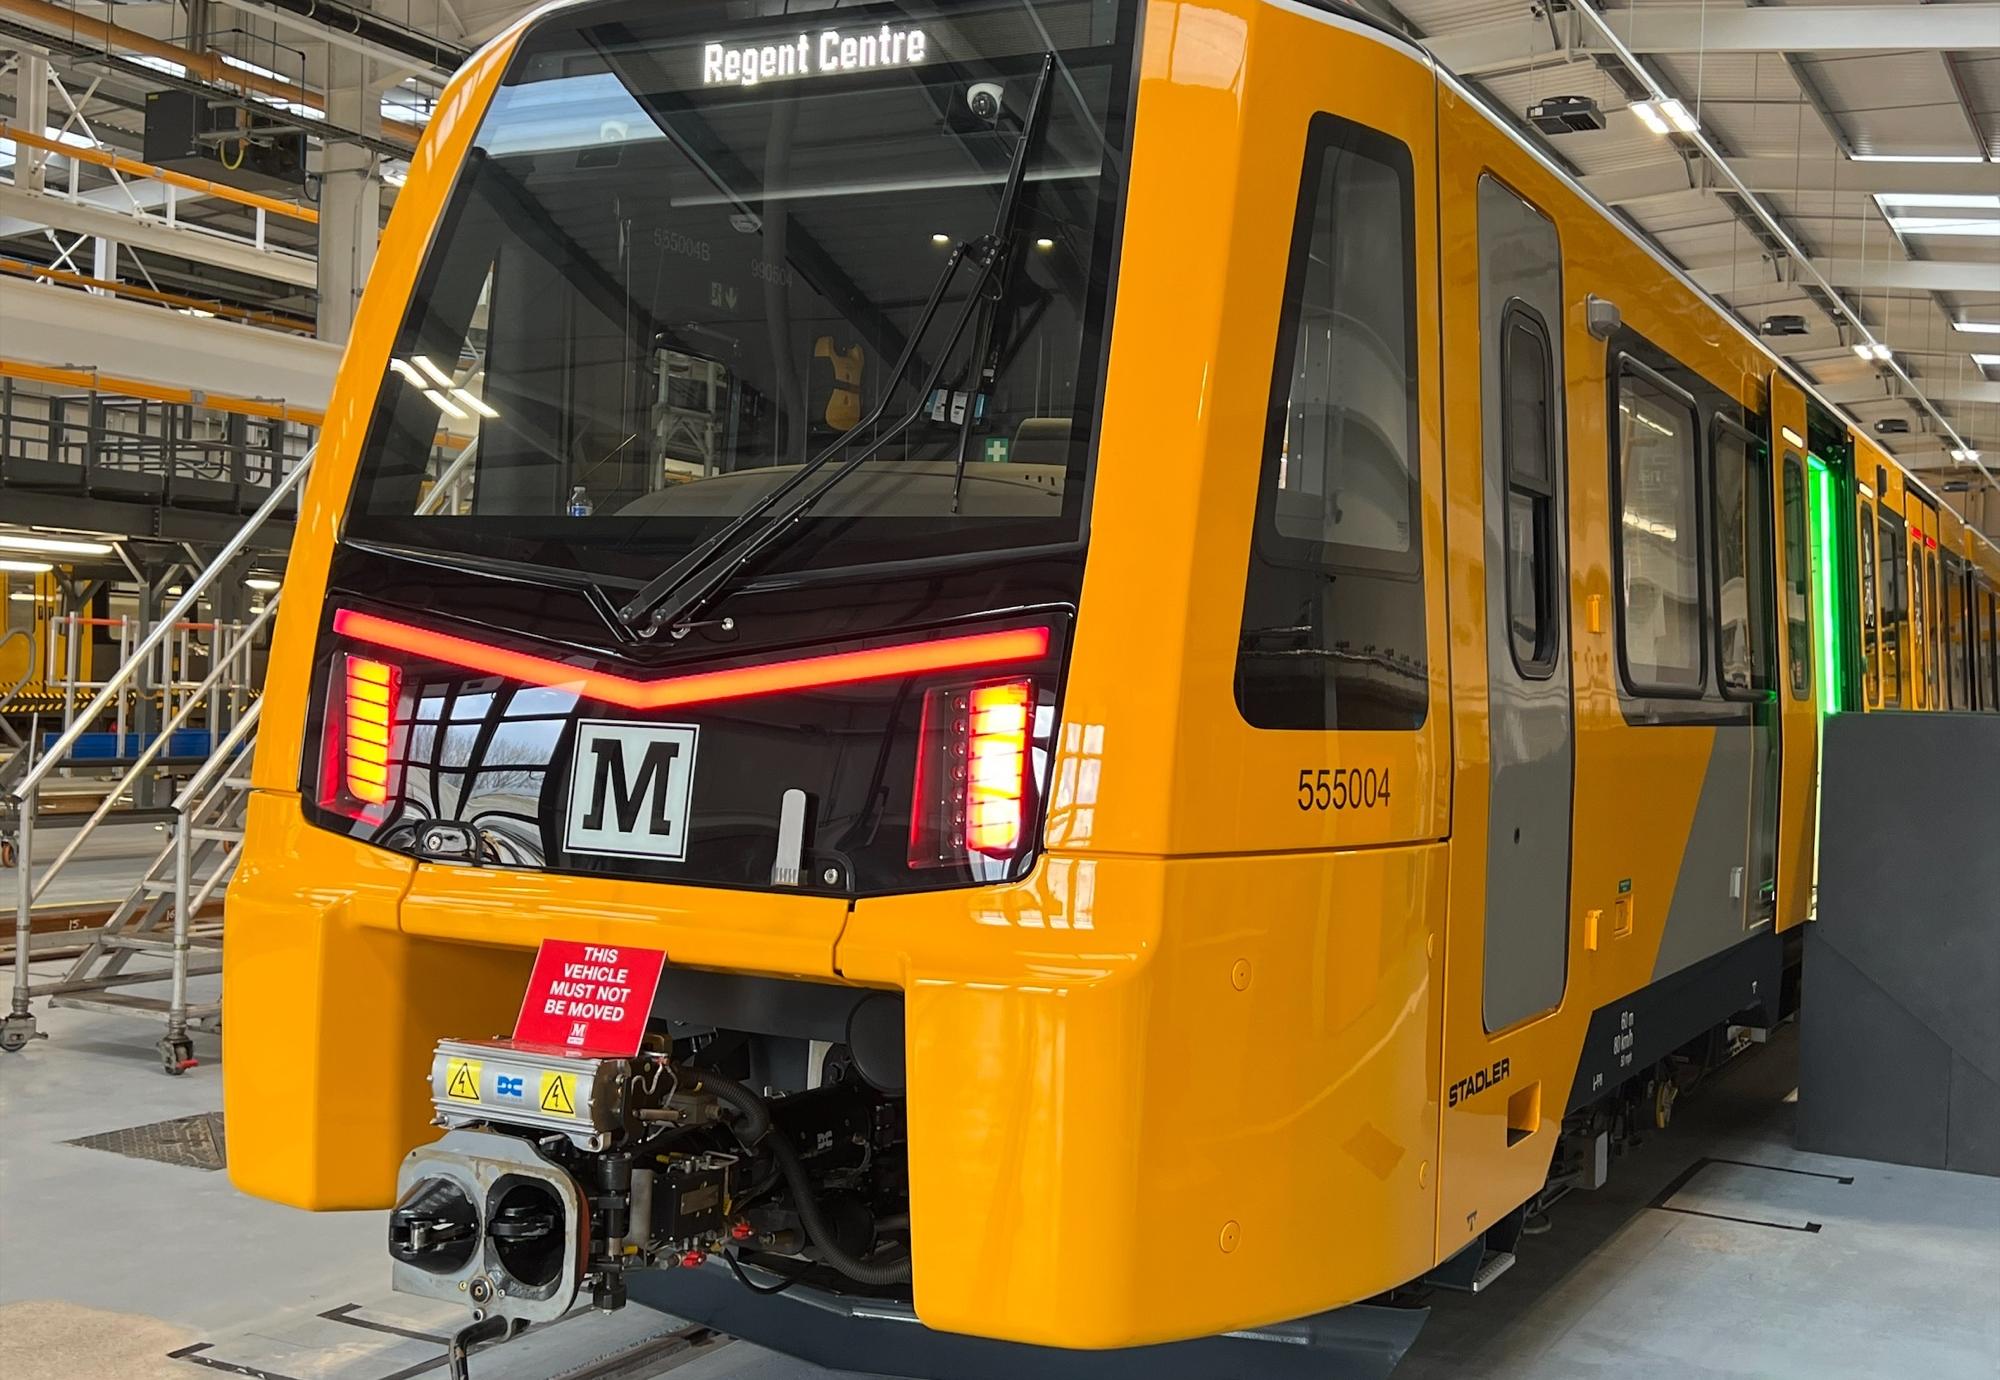 New signalling technology to be installed at Tyne and Wear Metro depot